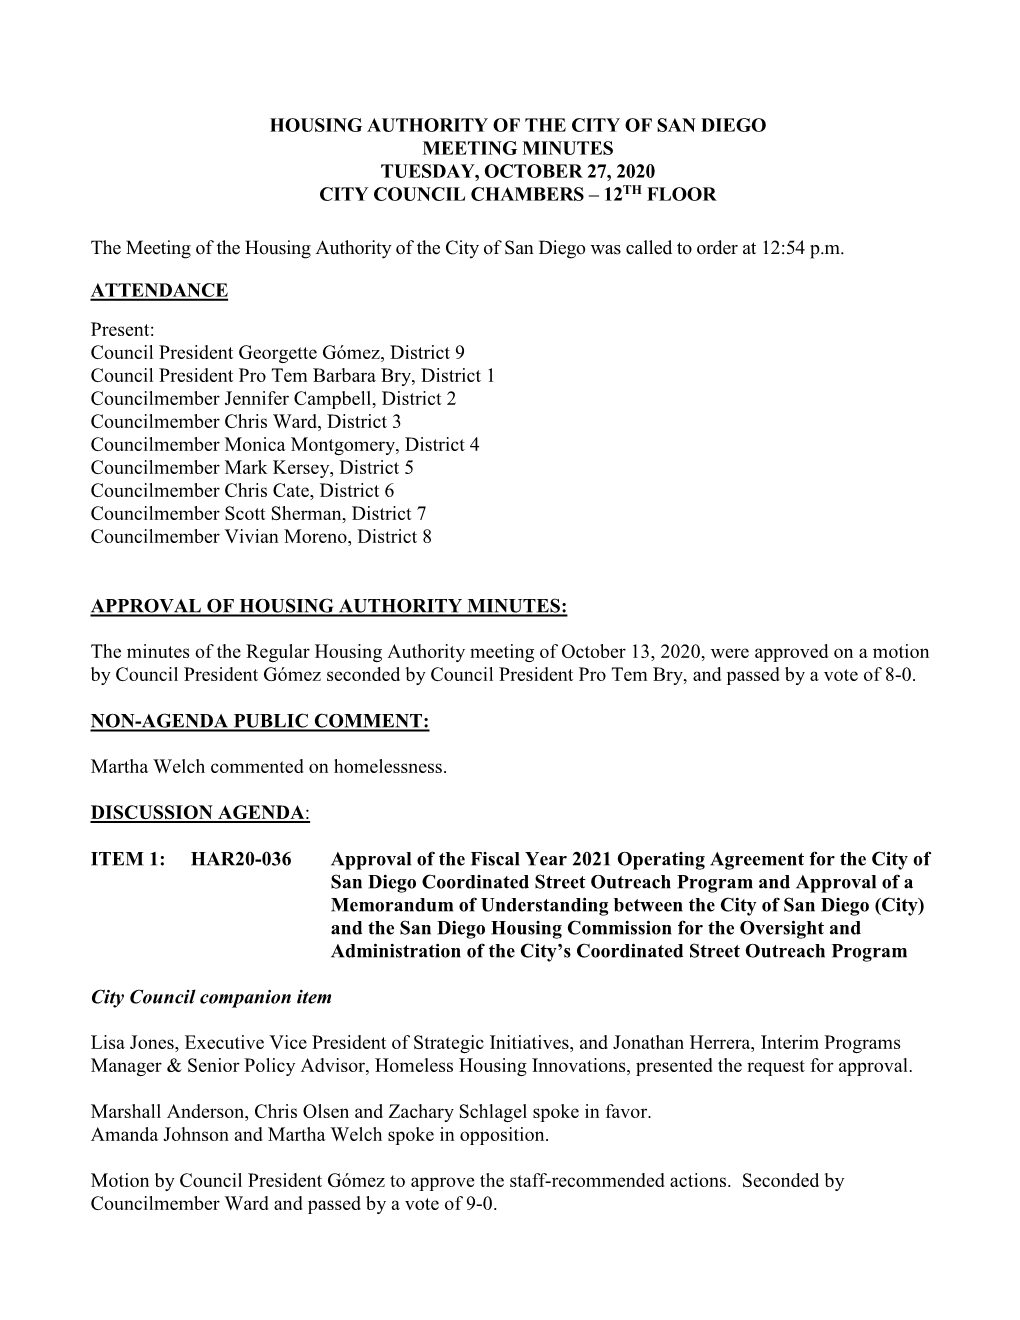 Housing Authority of the City of San Diego Meeting Minutes Tuesday, October 27, 2020 City Council Chambers – 12Th Floor